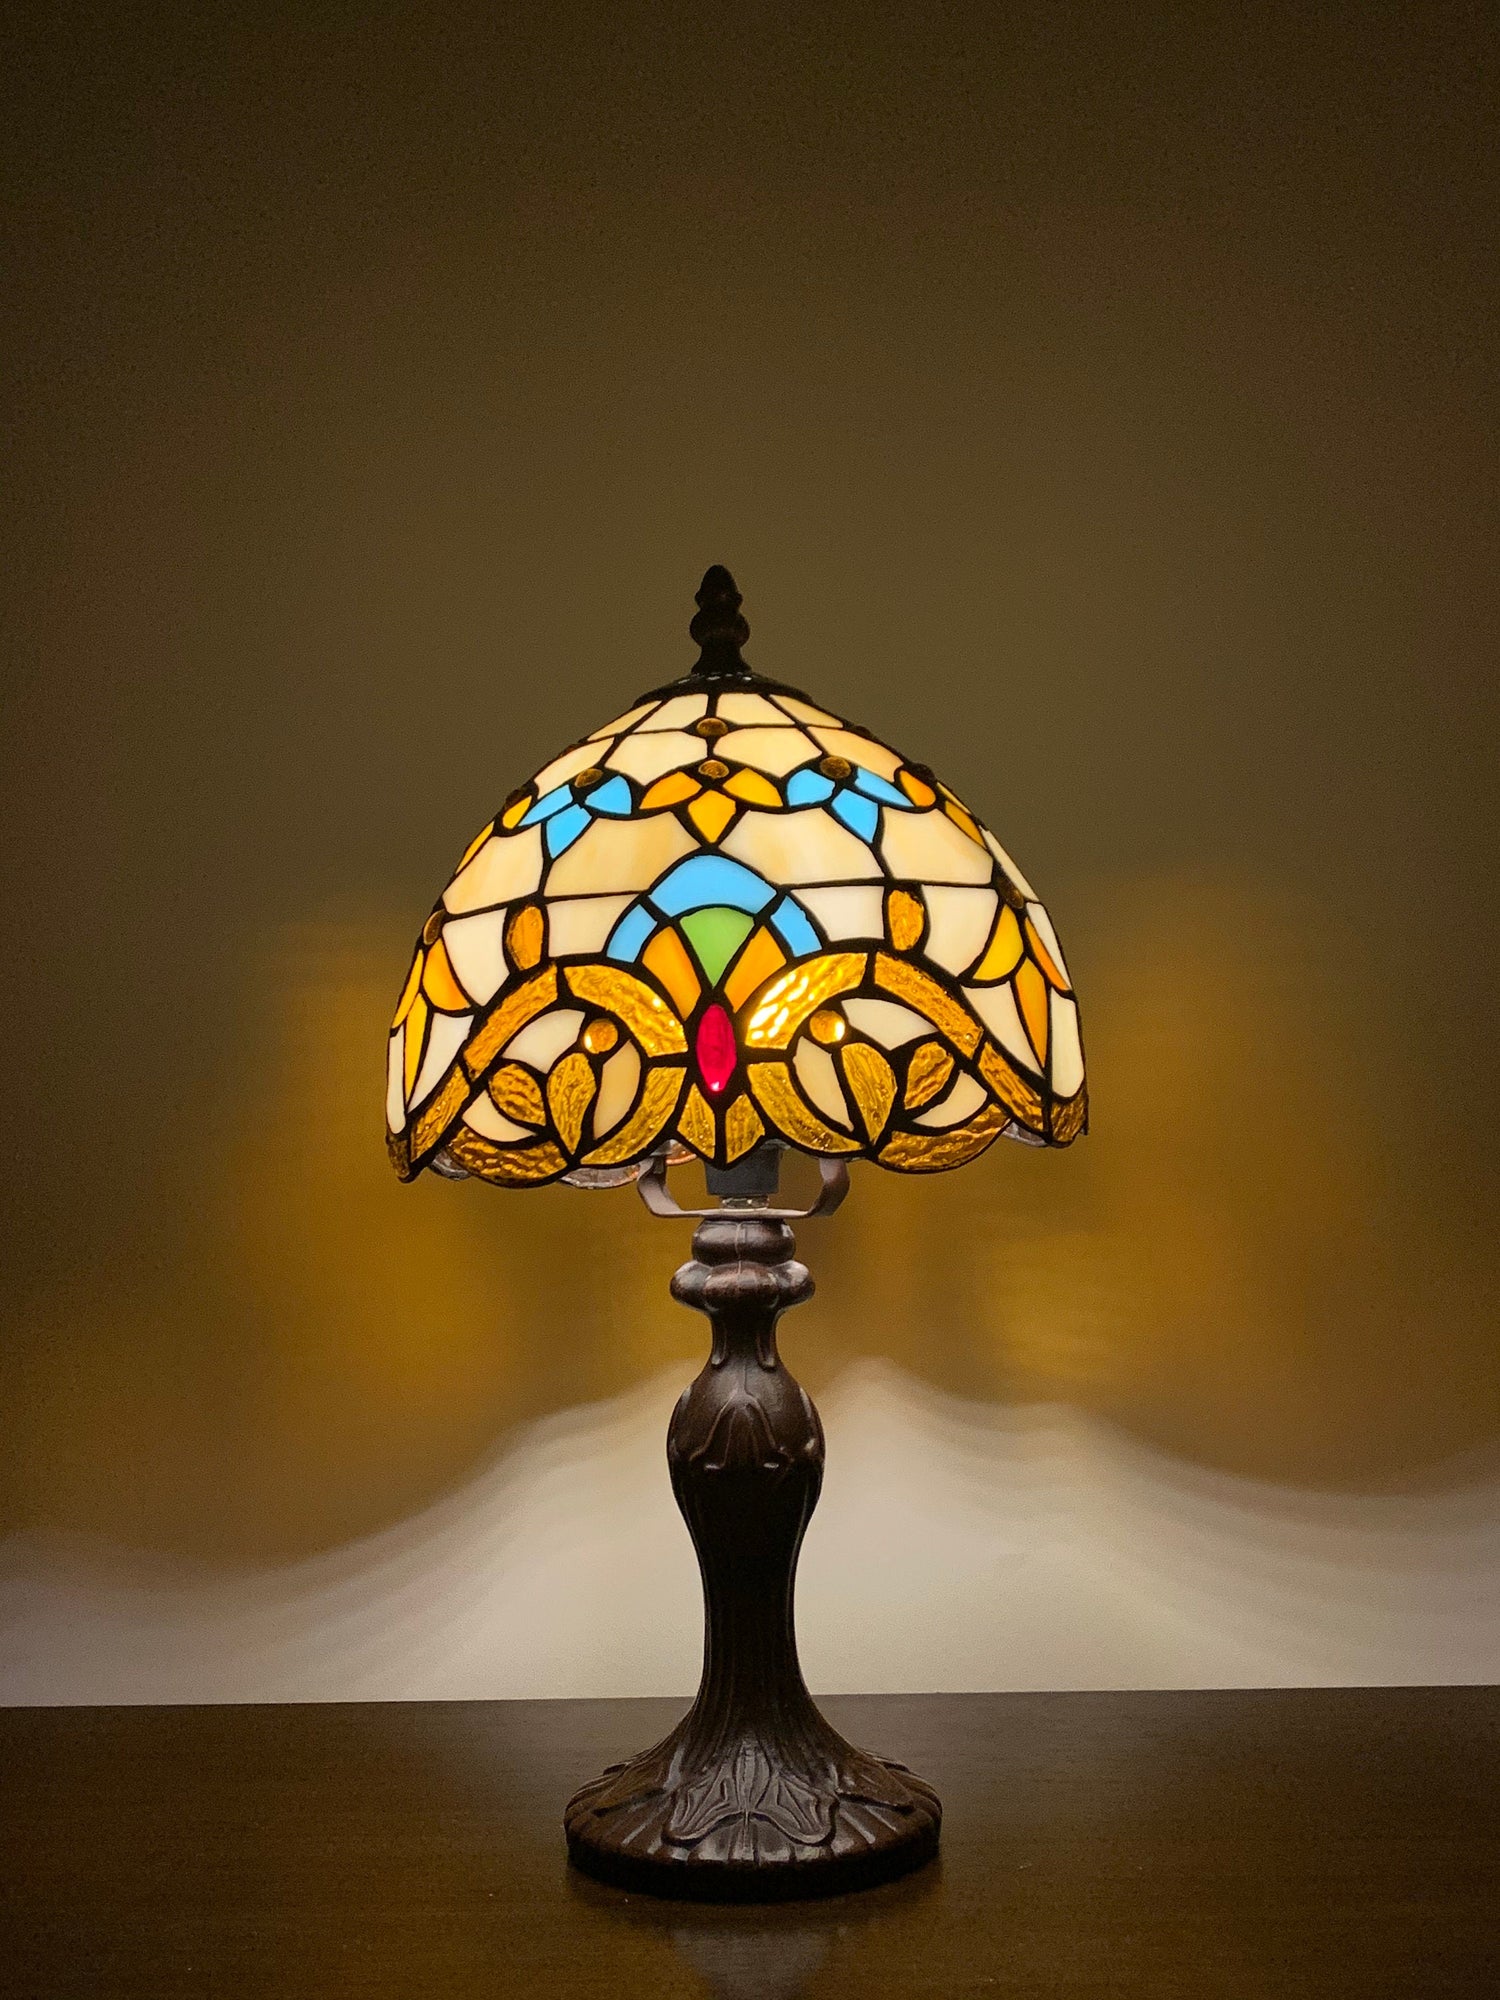 Crown Tiffany Lamp, Leadglass Stained Glass Shade, Crystal Bead Lamp Shade, Antique Lampshade, Stained Glass Lamp Shade, Bedside Lamp